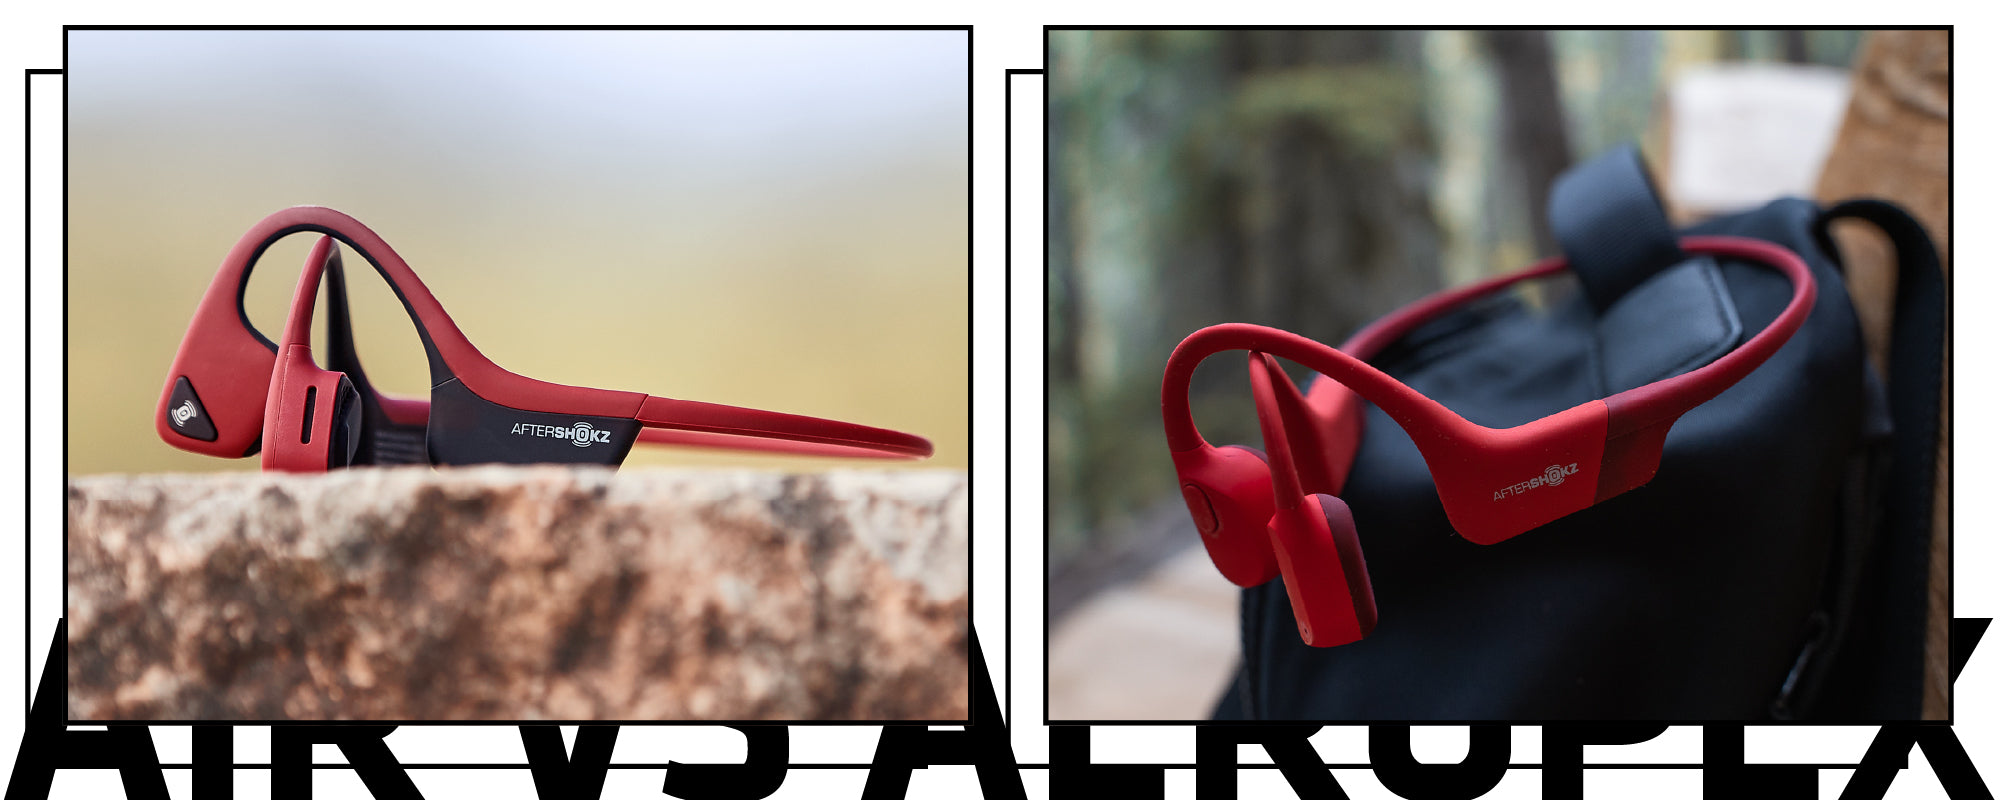 Air vs Aeropex: Find The Best AfterShokz Headphone For You